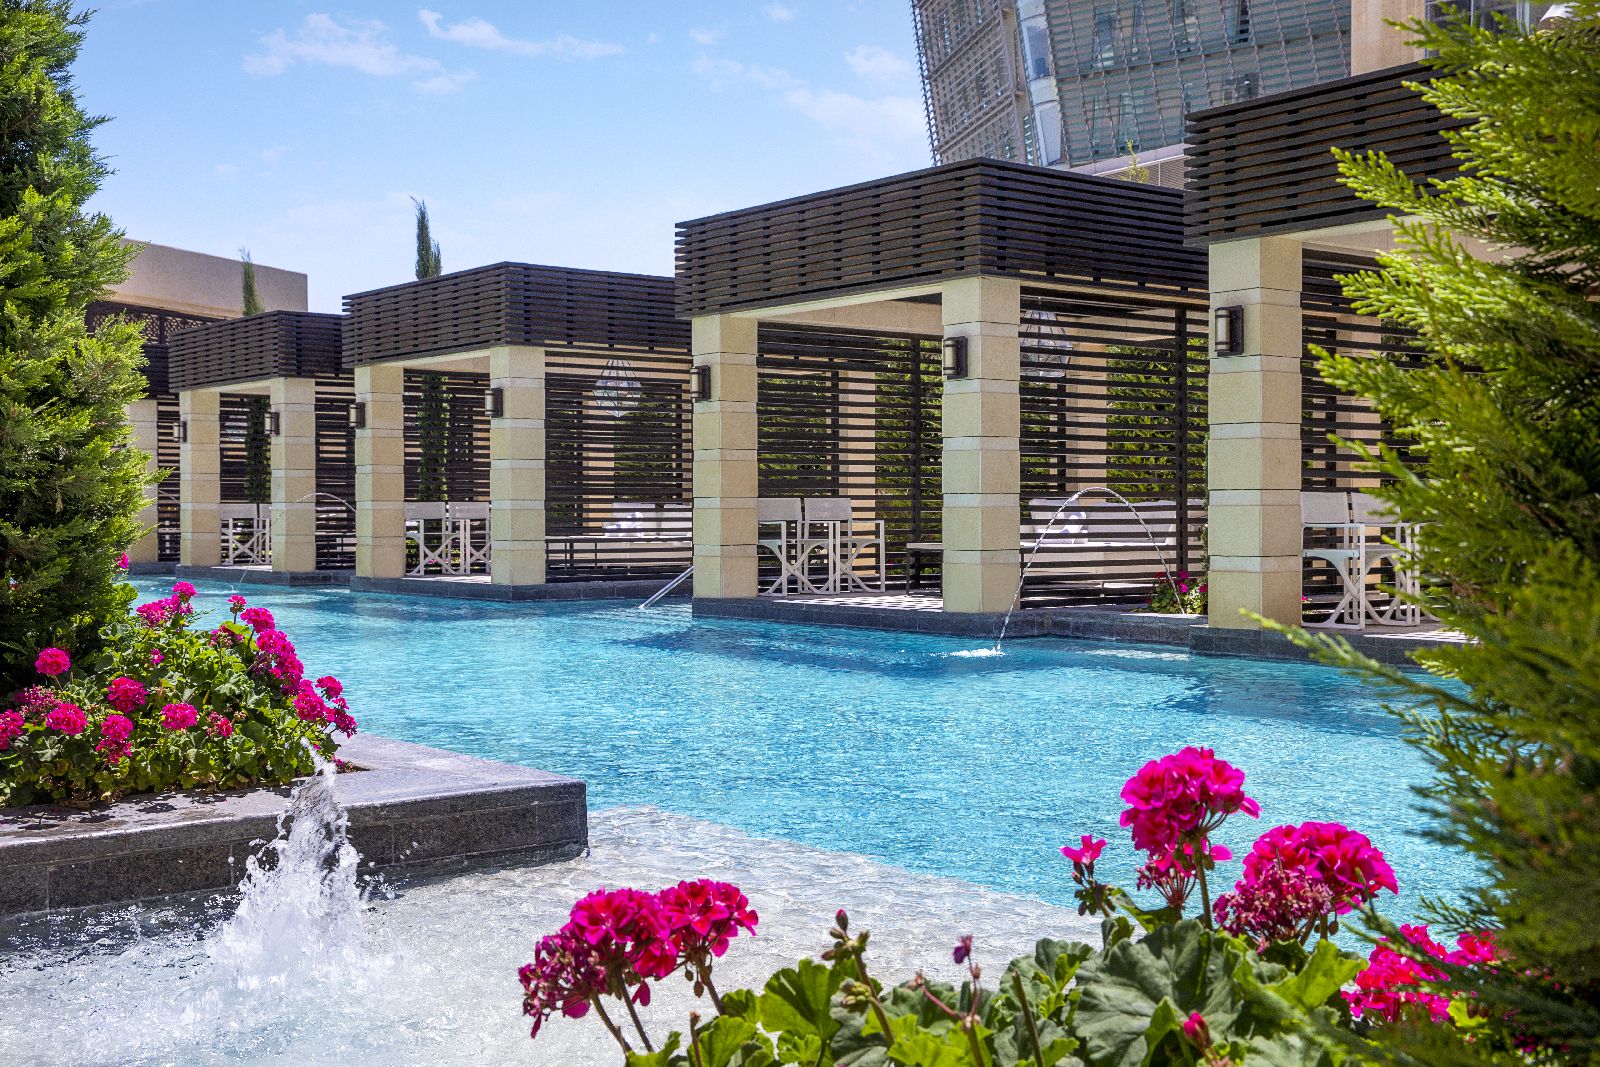 Swimminh pool and day beds at the St Regis Amman Jordan